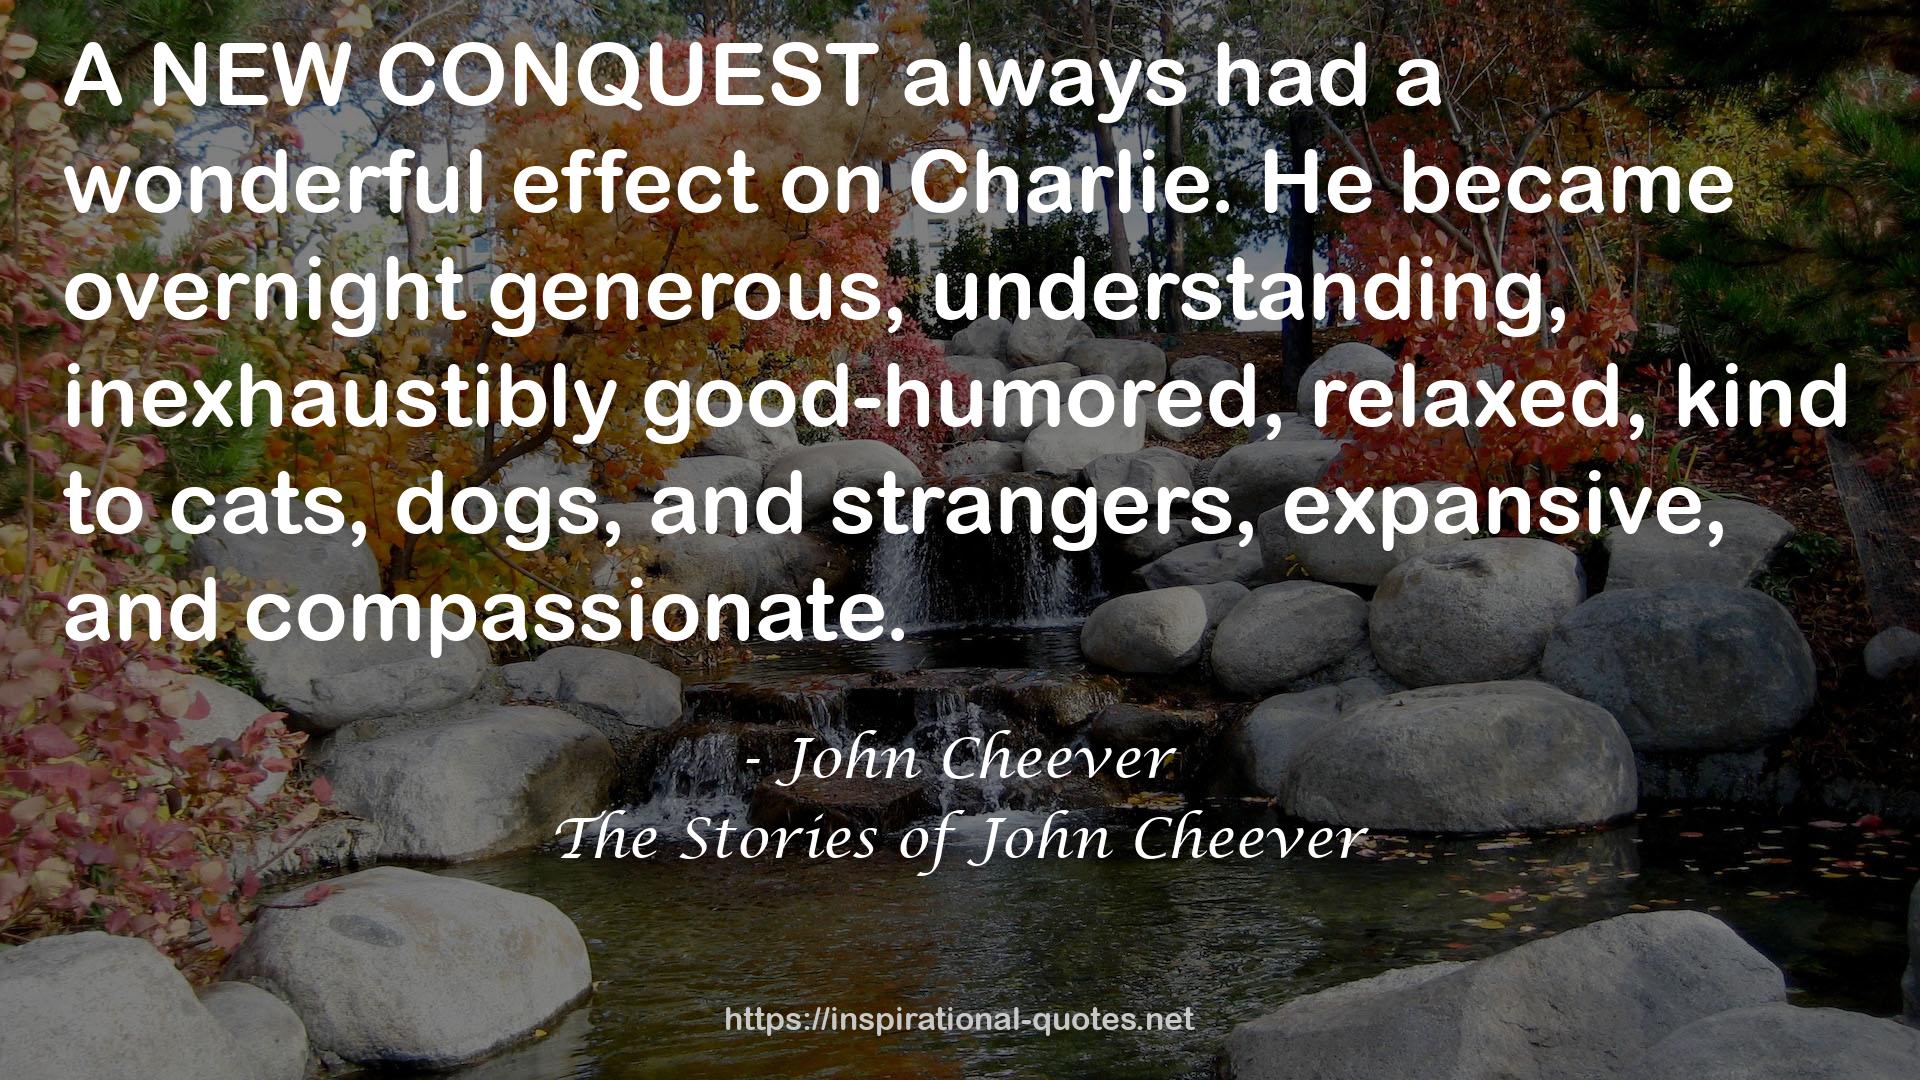 The Stories of John Cheever QUOTES